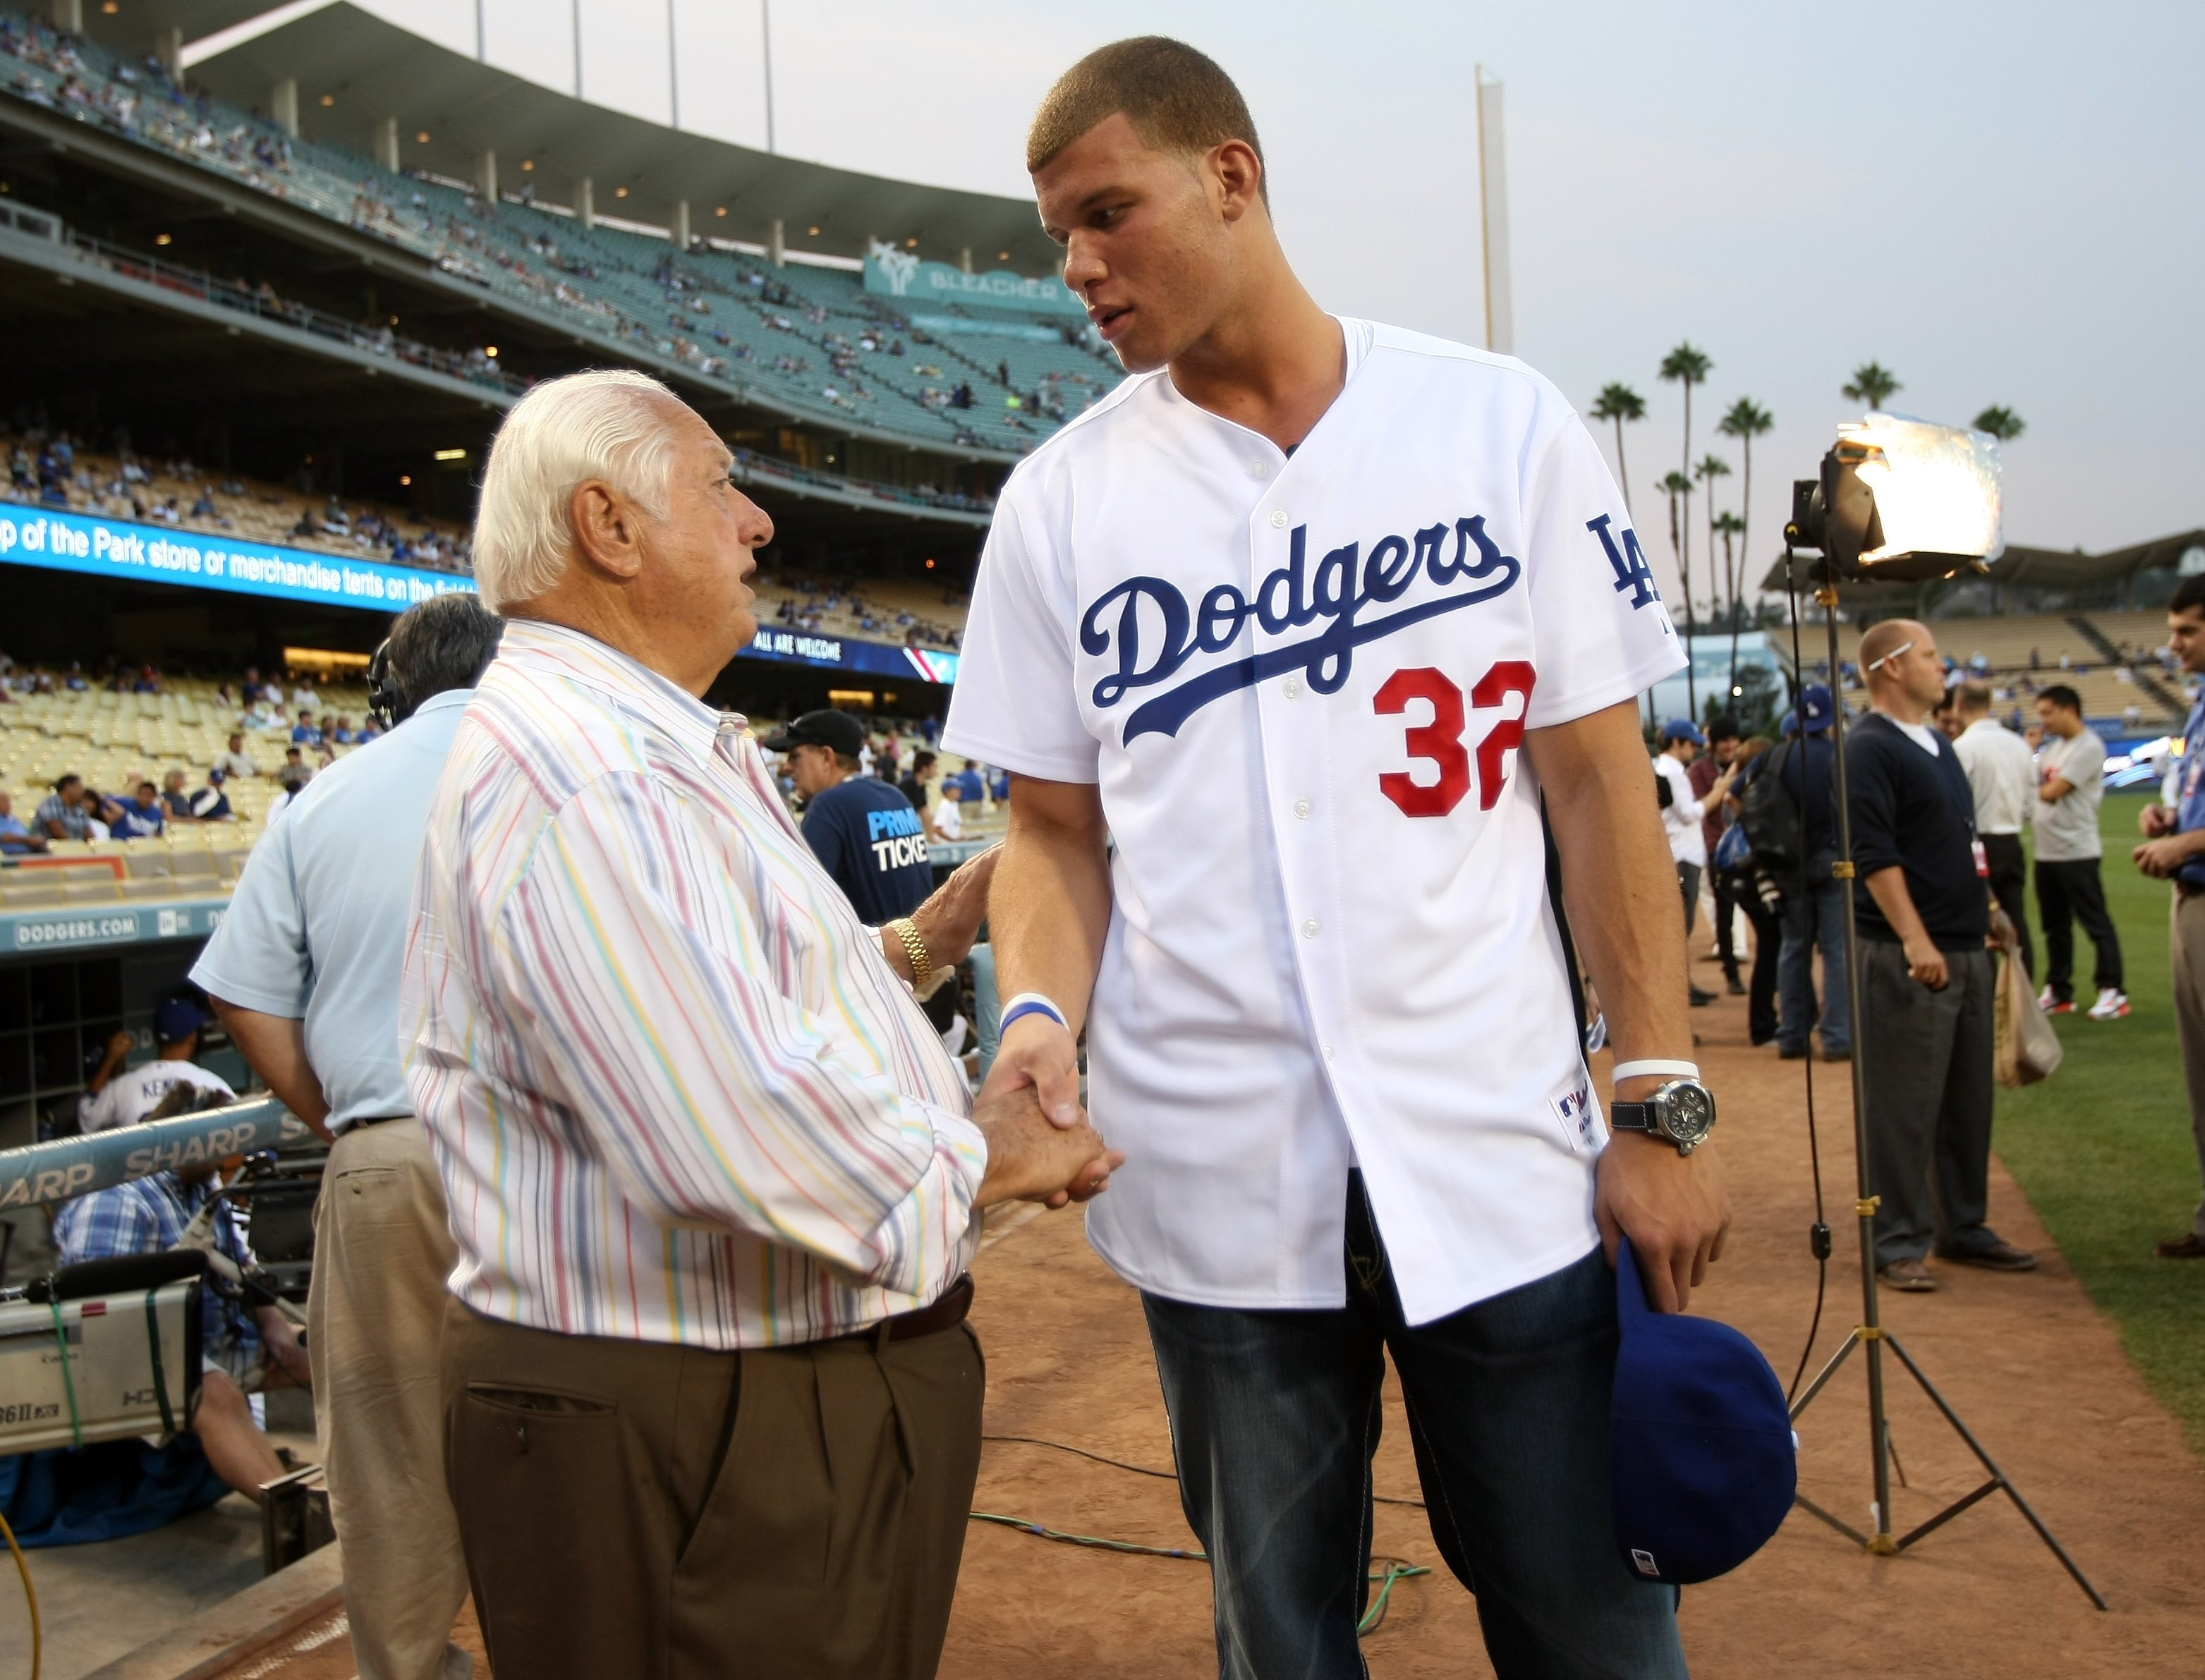 Donald Sterling scandal: Tommy Lasorda says he hopes V. Stiviano gets hit  with a car - CBS News